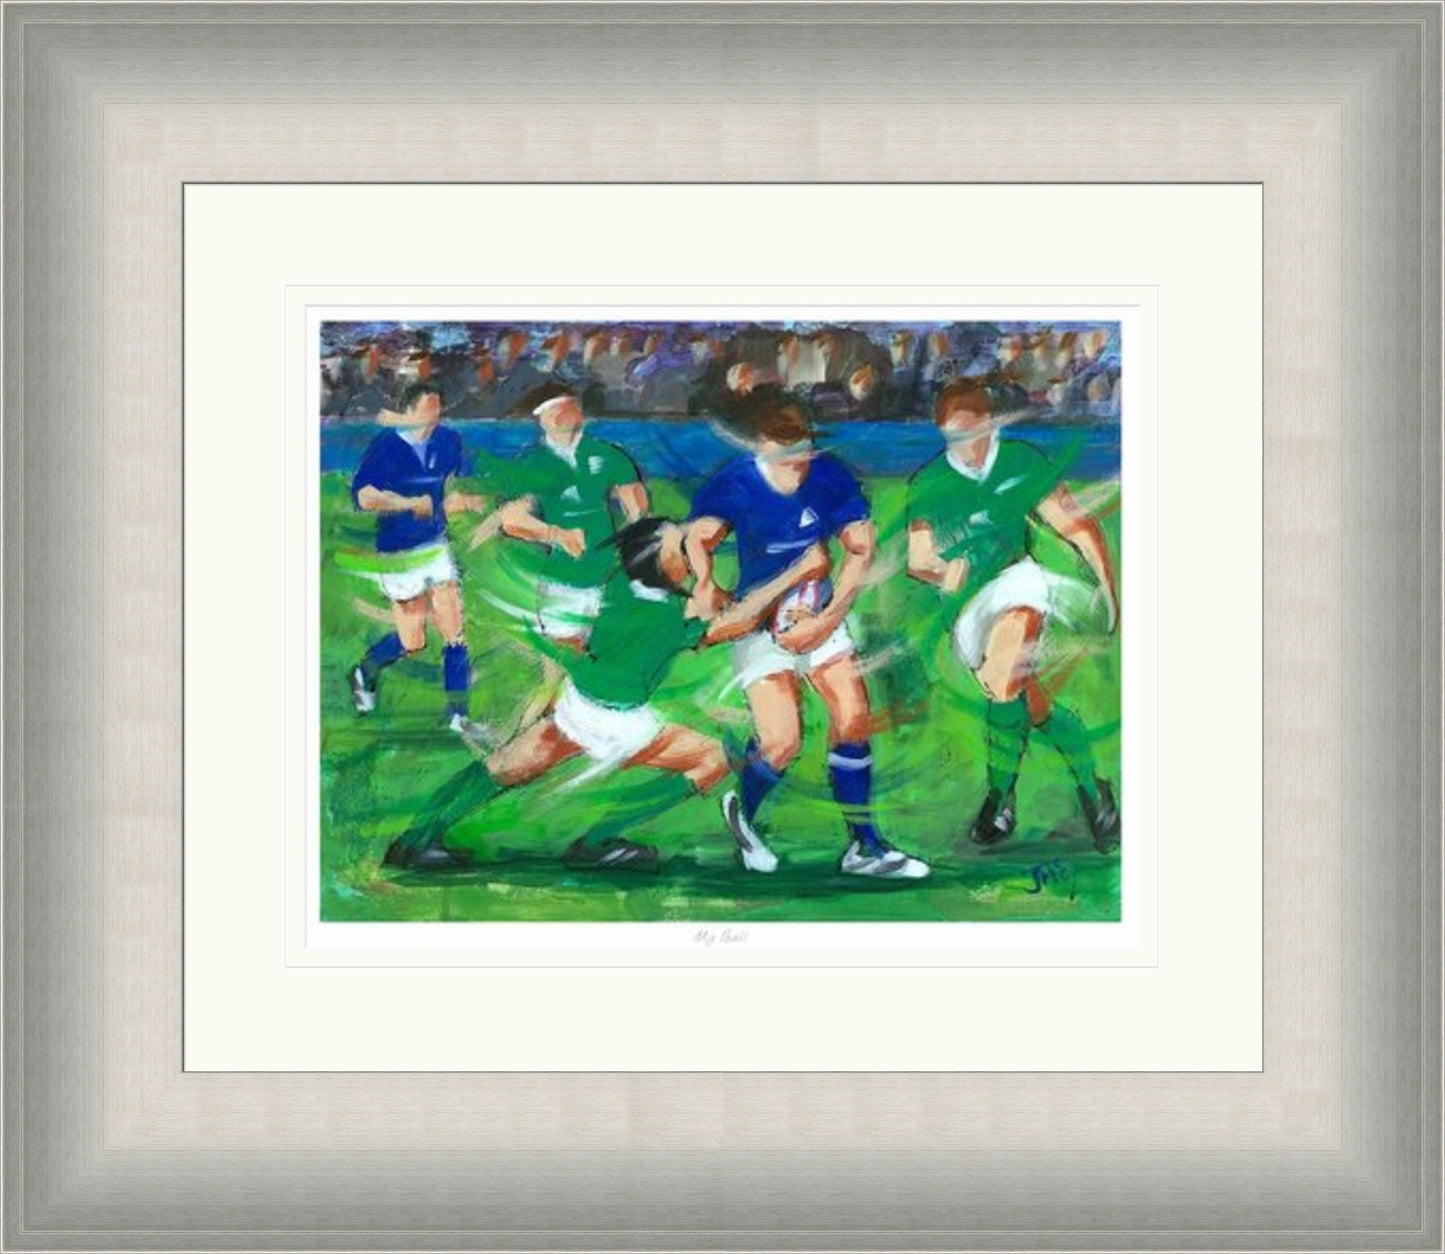 My Ball Rugby Art Print by Janet McCrorie